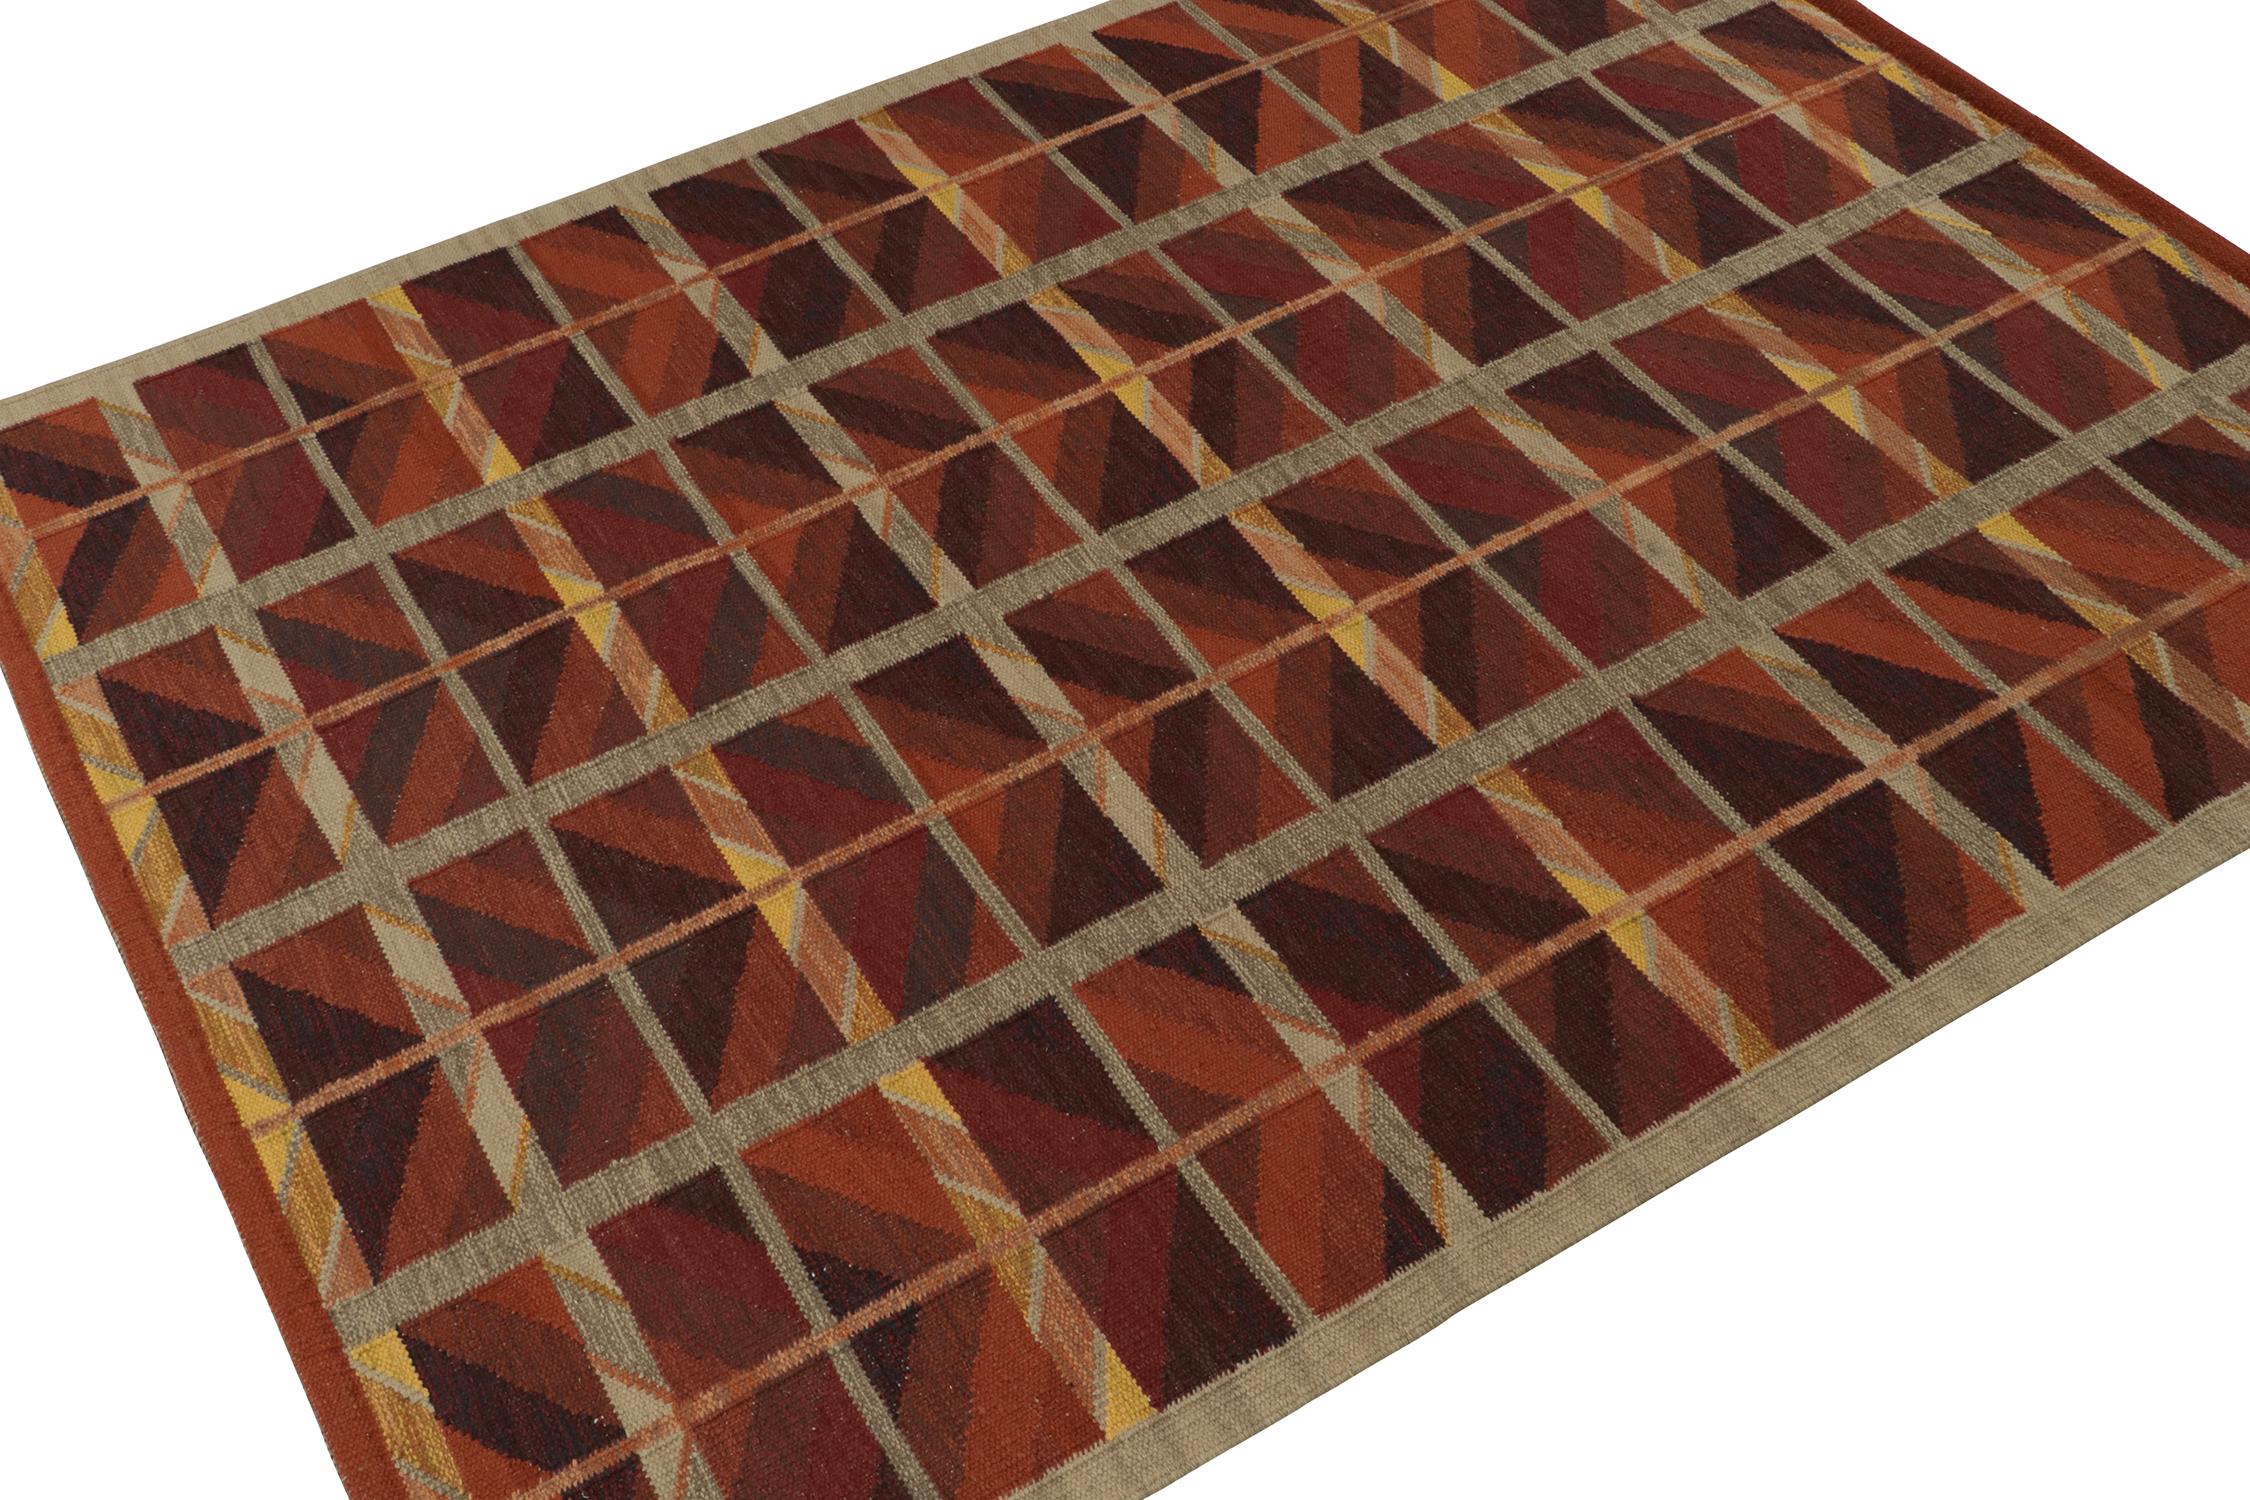 This 8x11 Swedish style kilim is the next addition to Rug & Kilim's award-winning Scandinavian flat weave collection. Handwoven in wool. 
Further On the Design: 
This rug enjoys geometric patterns in red, ochre, and gray with gold punctuations